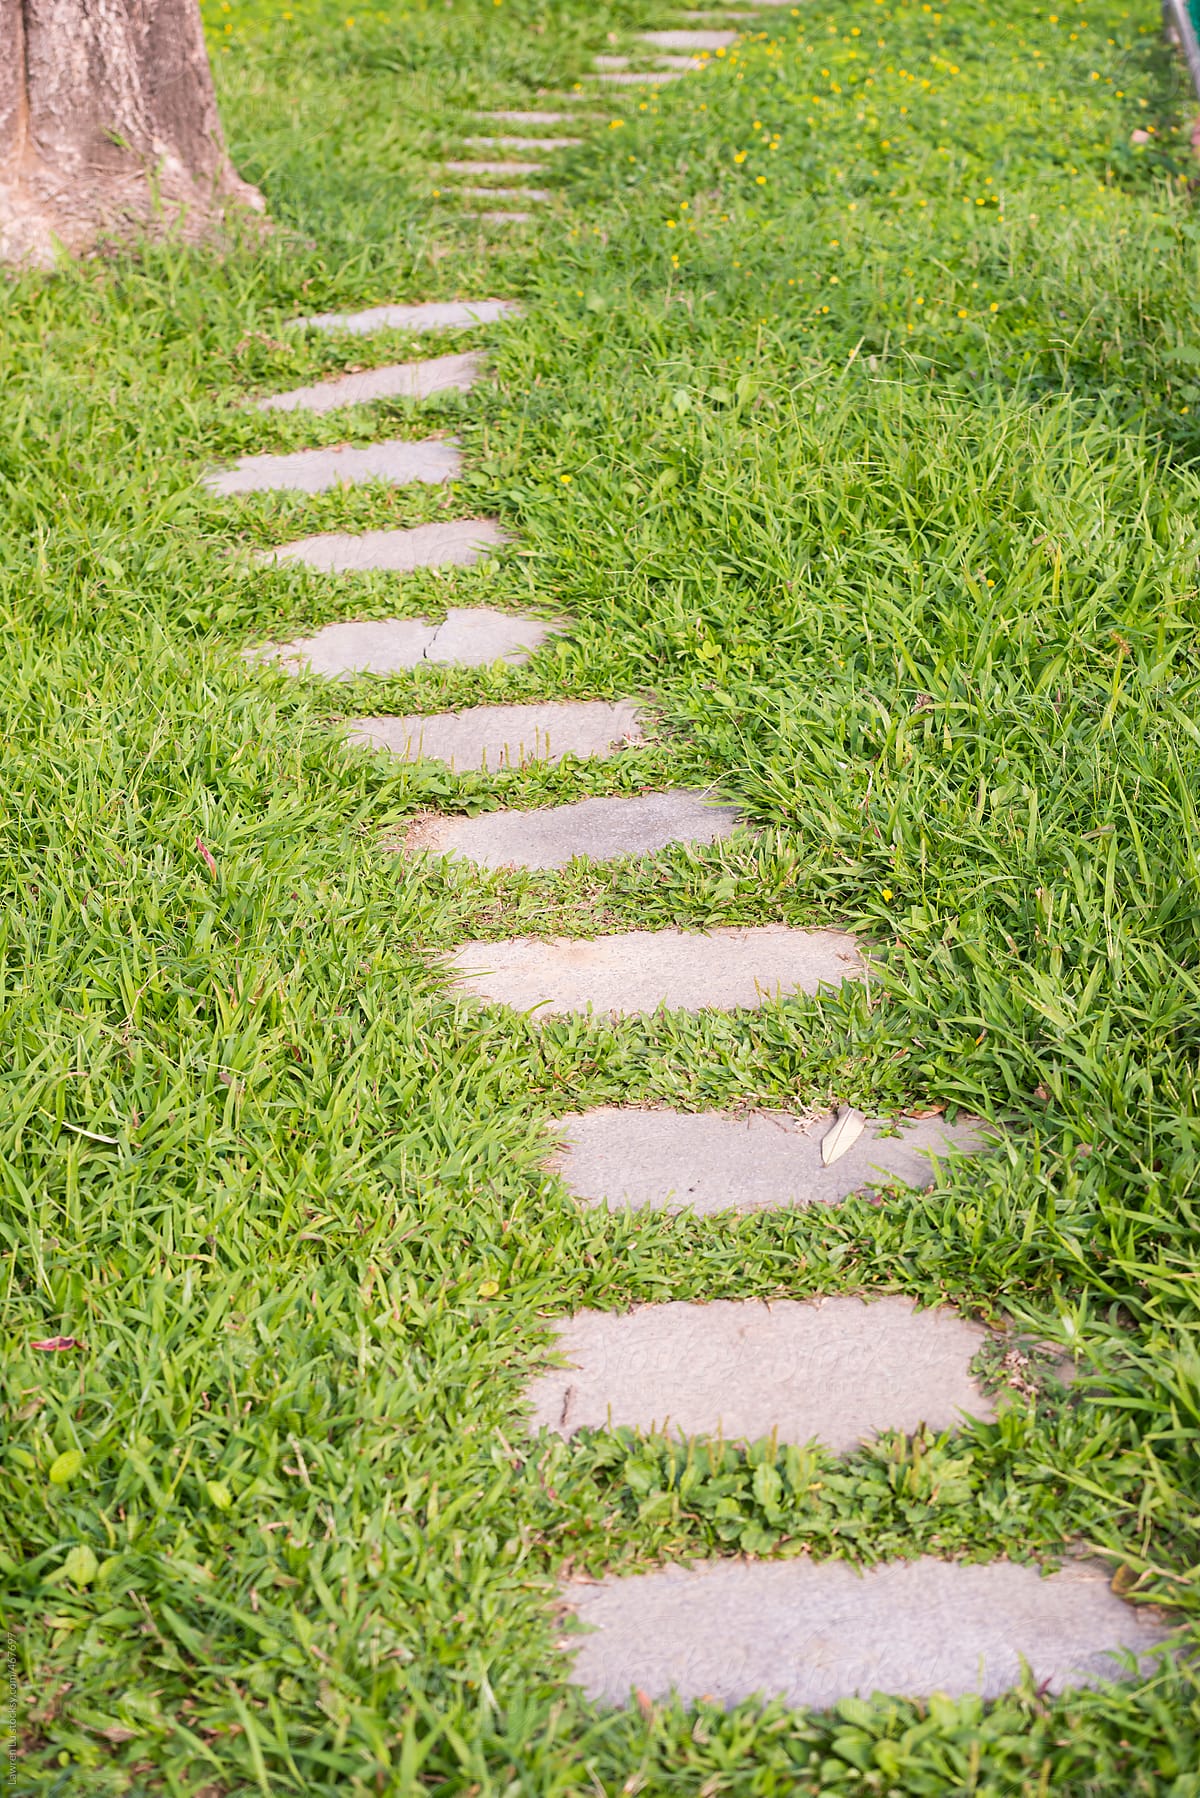 Paving stones crossing a green grassy lawn